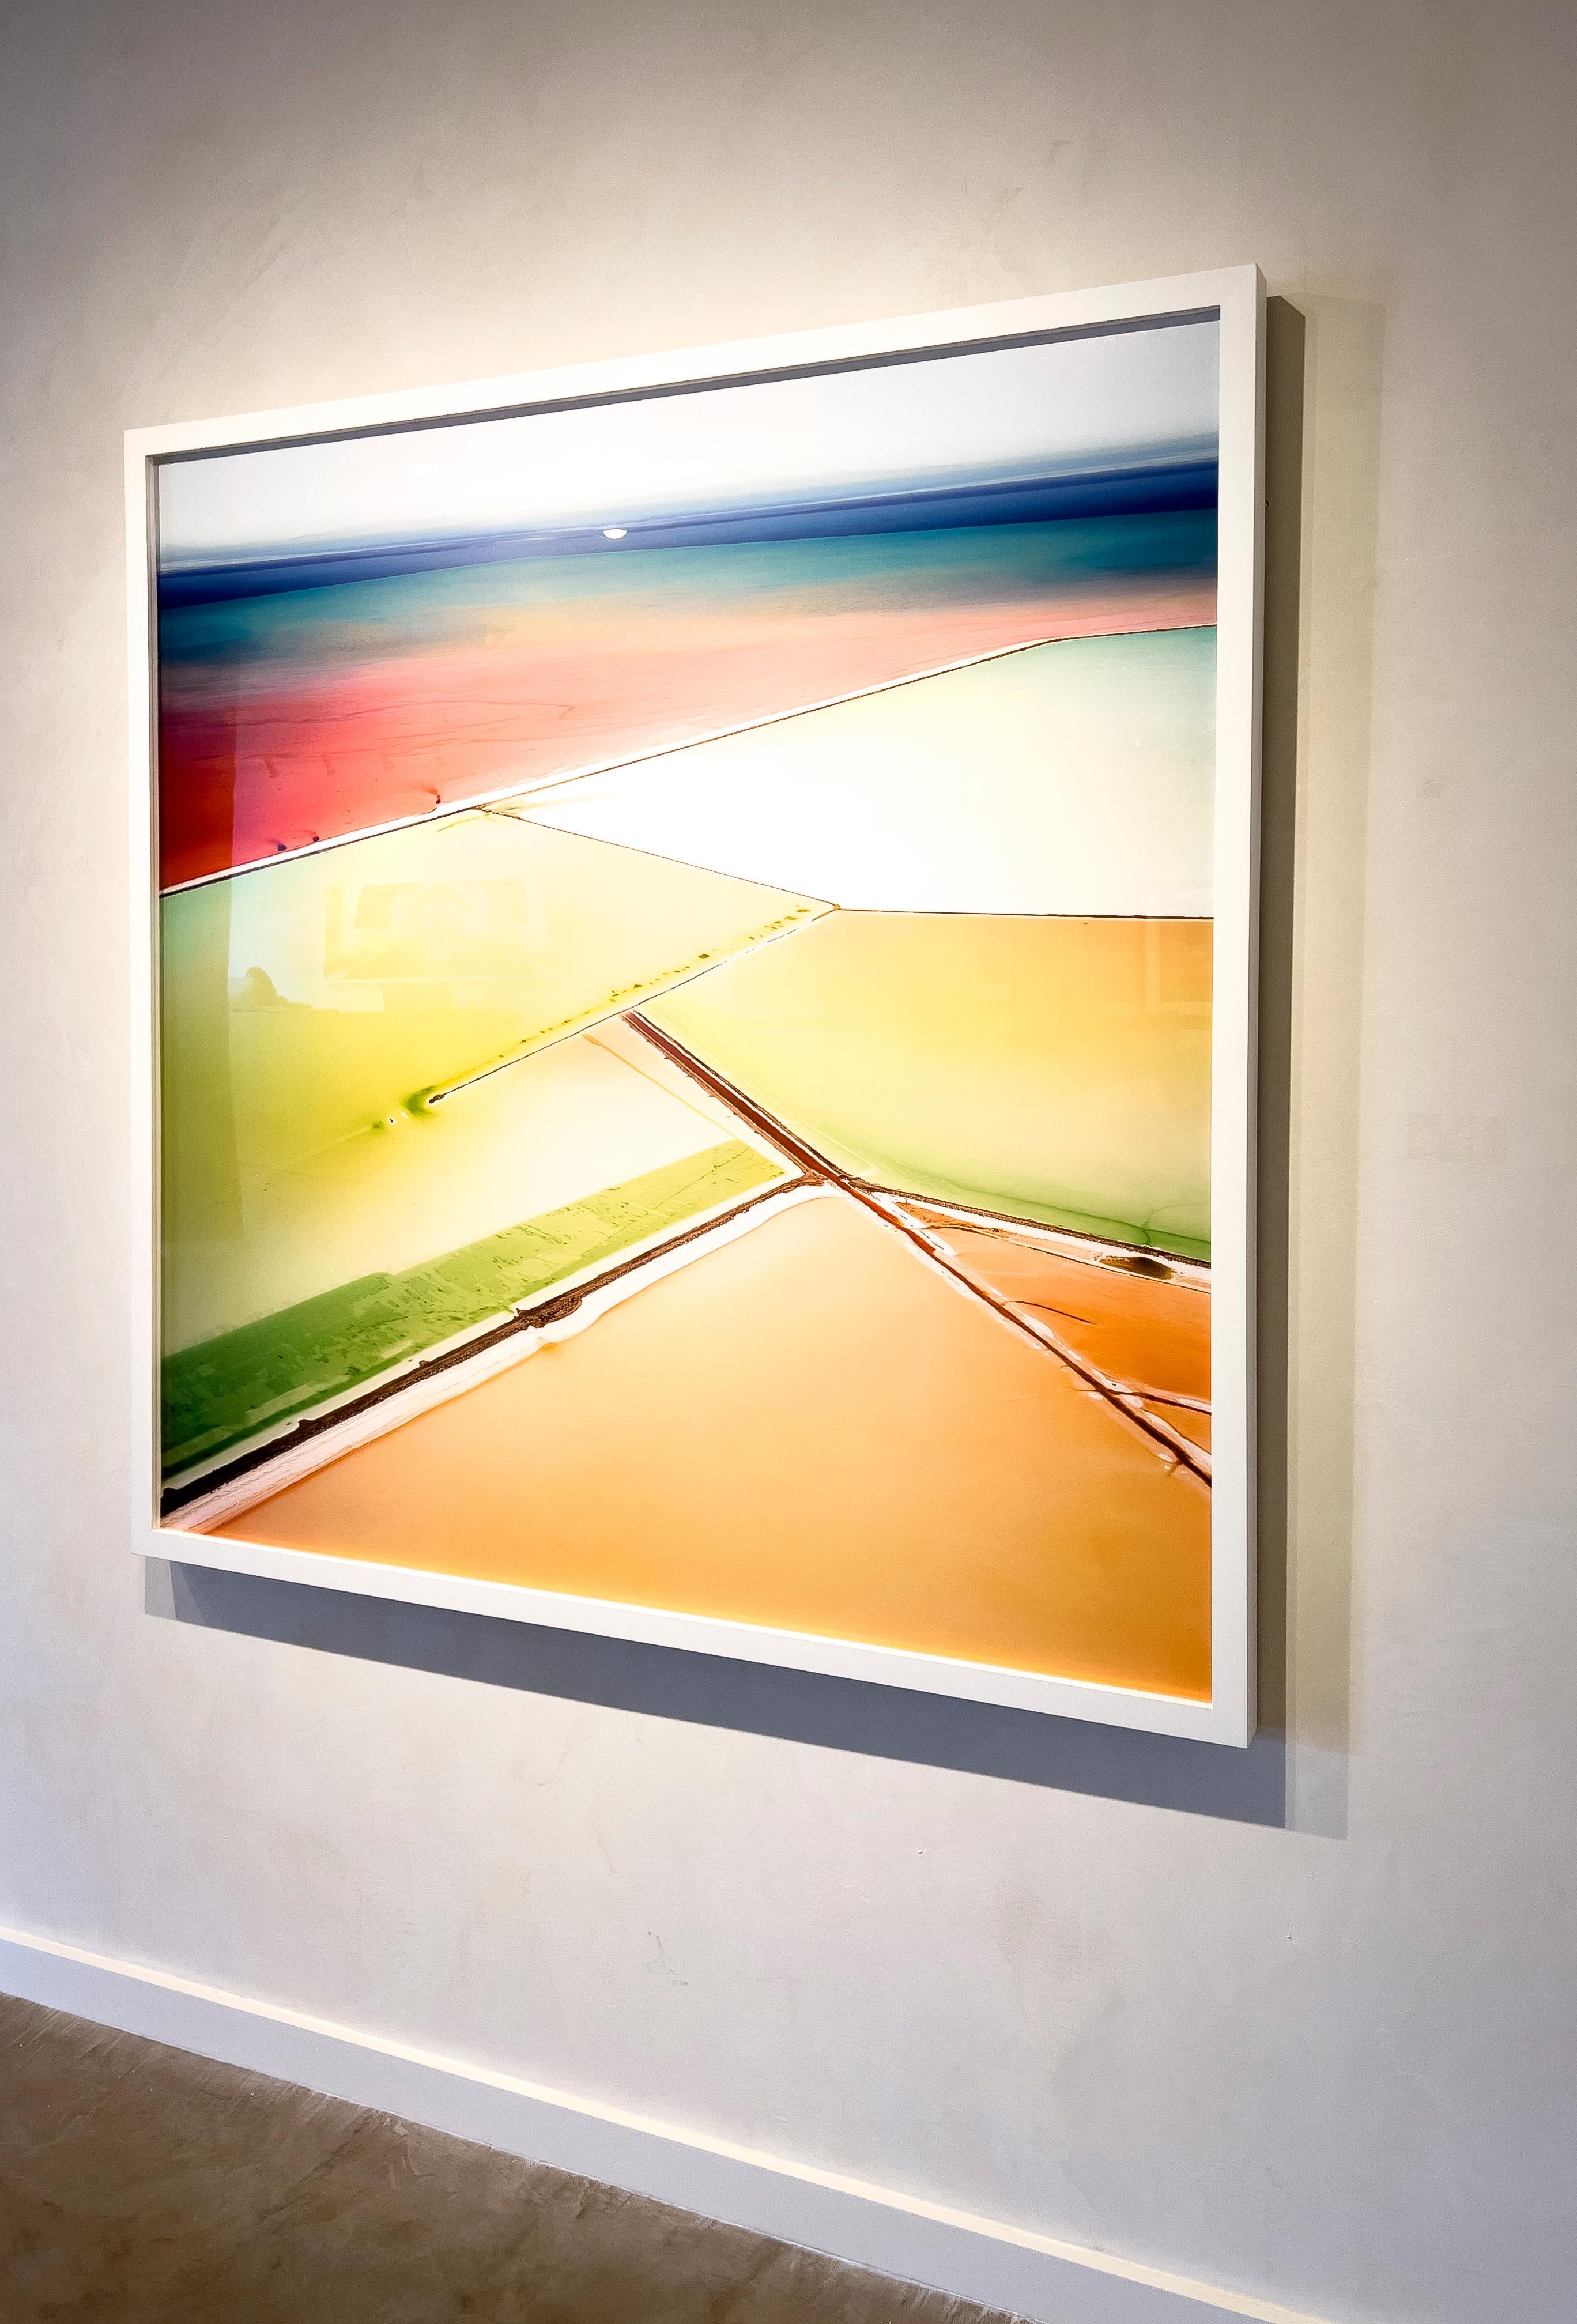 Saltern 06, Great Salt Lake, Utah- colorful aerial photograph framed in white - Photograph by David Burdeny